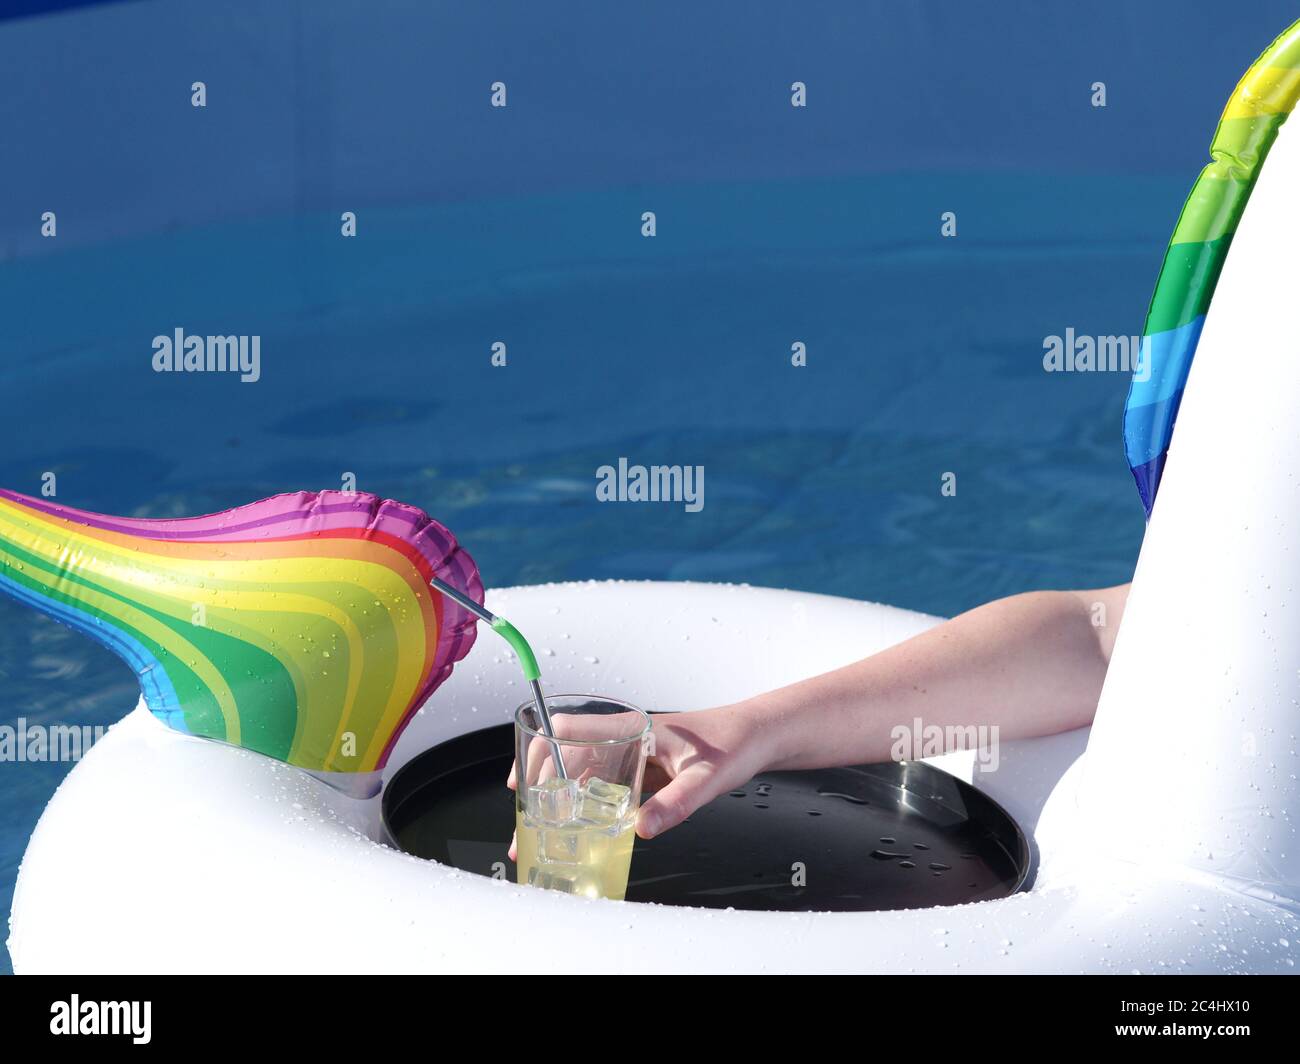 Swimming pool inflatable and drinks tray Stock Photo